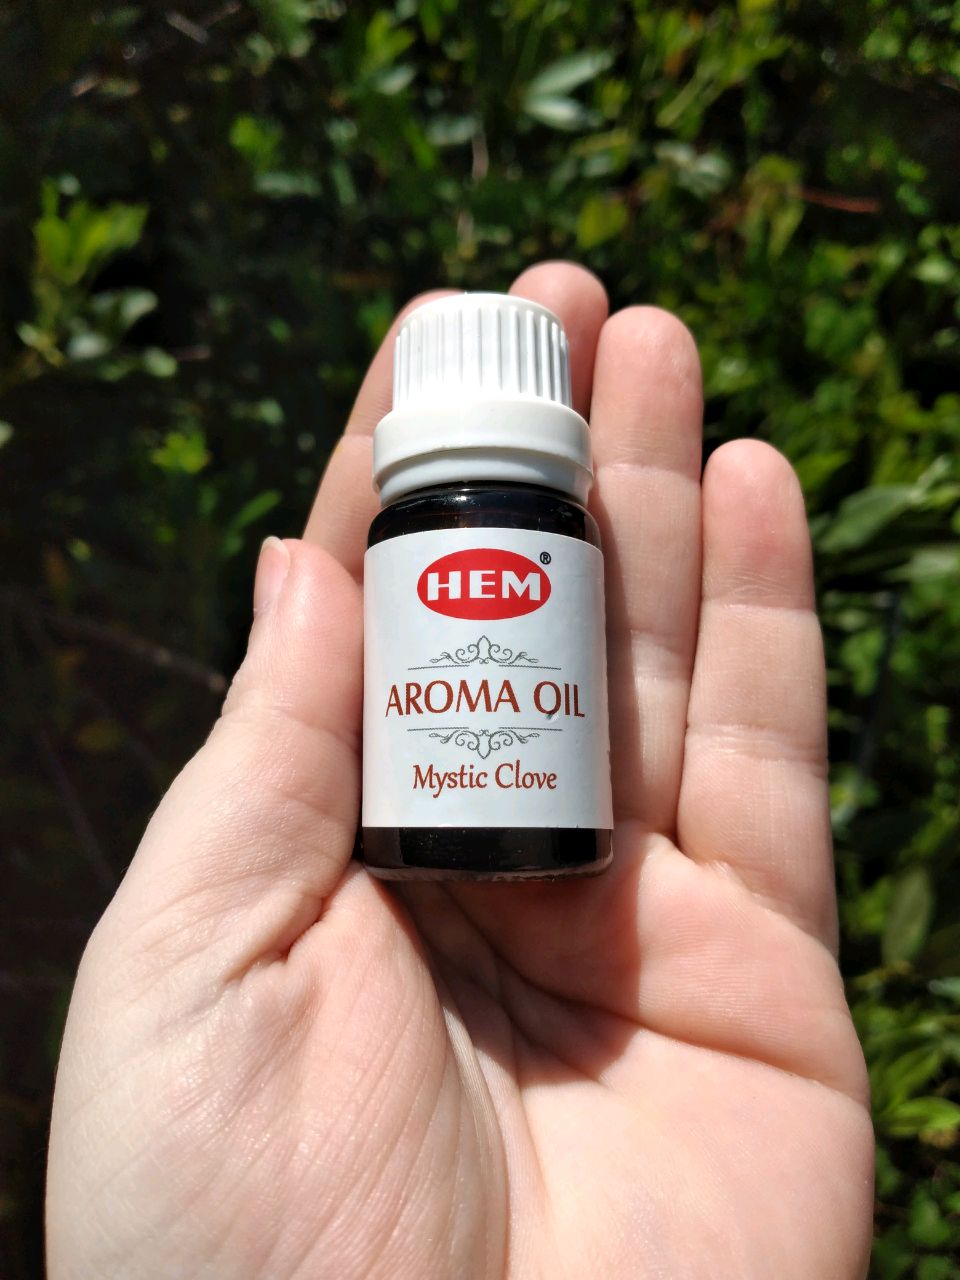 HEM Aroma Oil for Aromatherapy Diffusers &amp; Lamps - 10ml Mystic Clove Scent 2